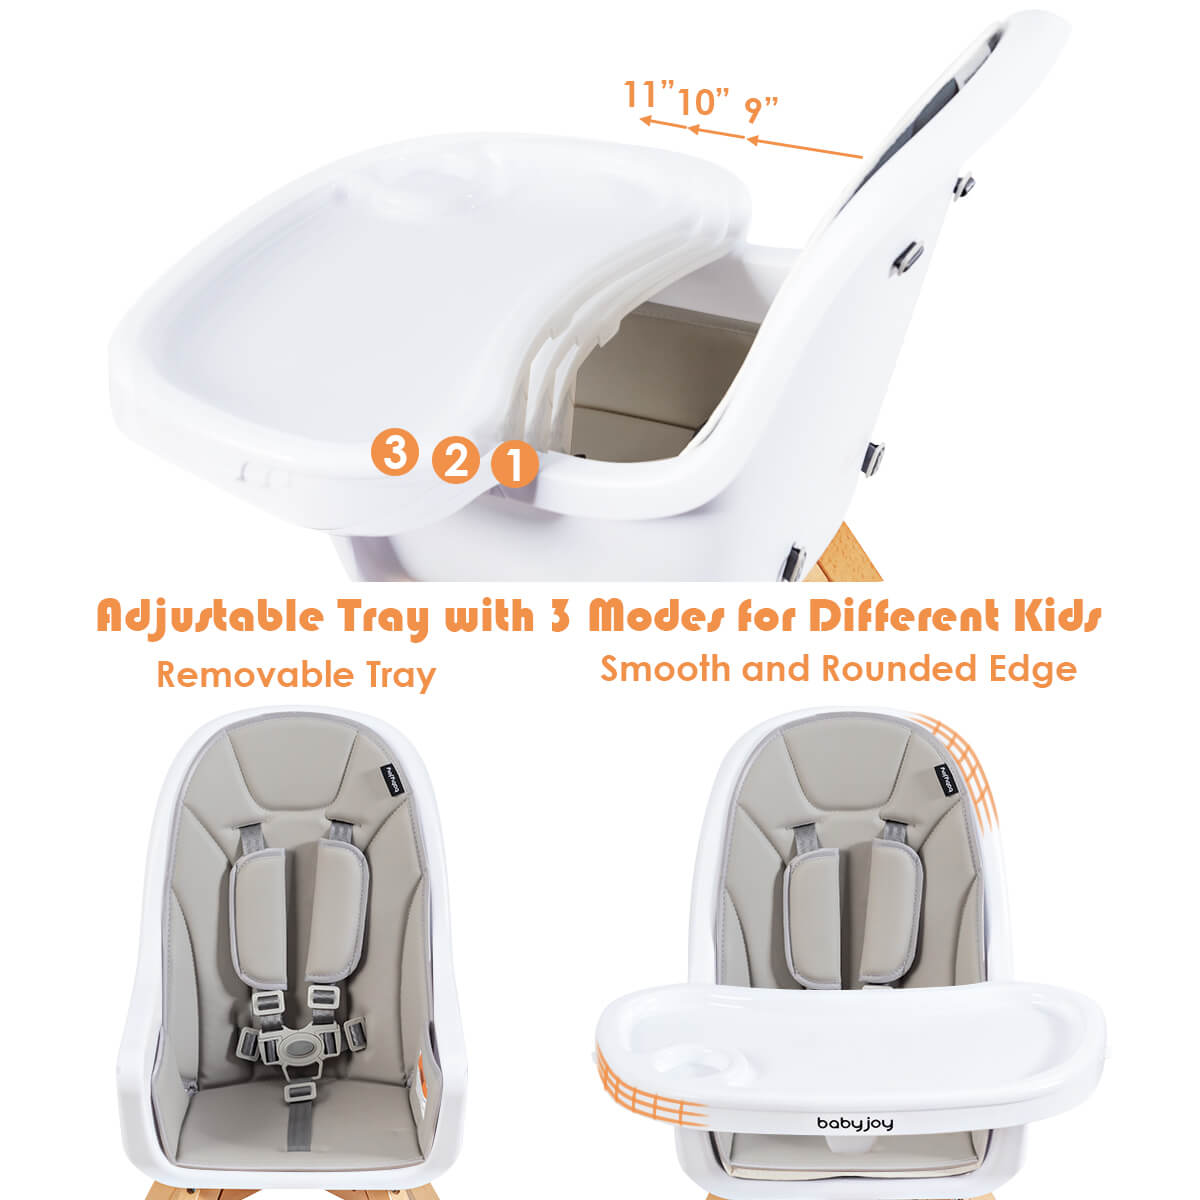 3-in-1 Convertible Baby High Chair with Replaceable Legs and Rocking Bar - Gallery Canada